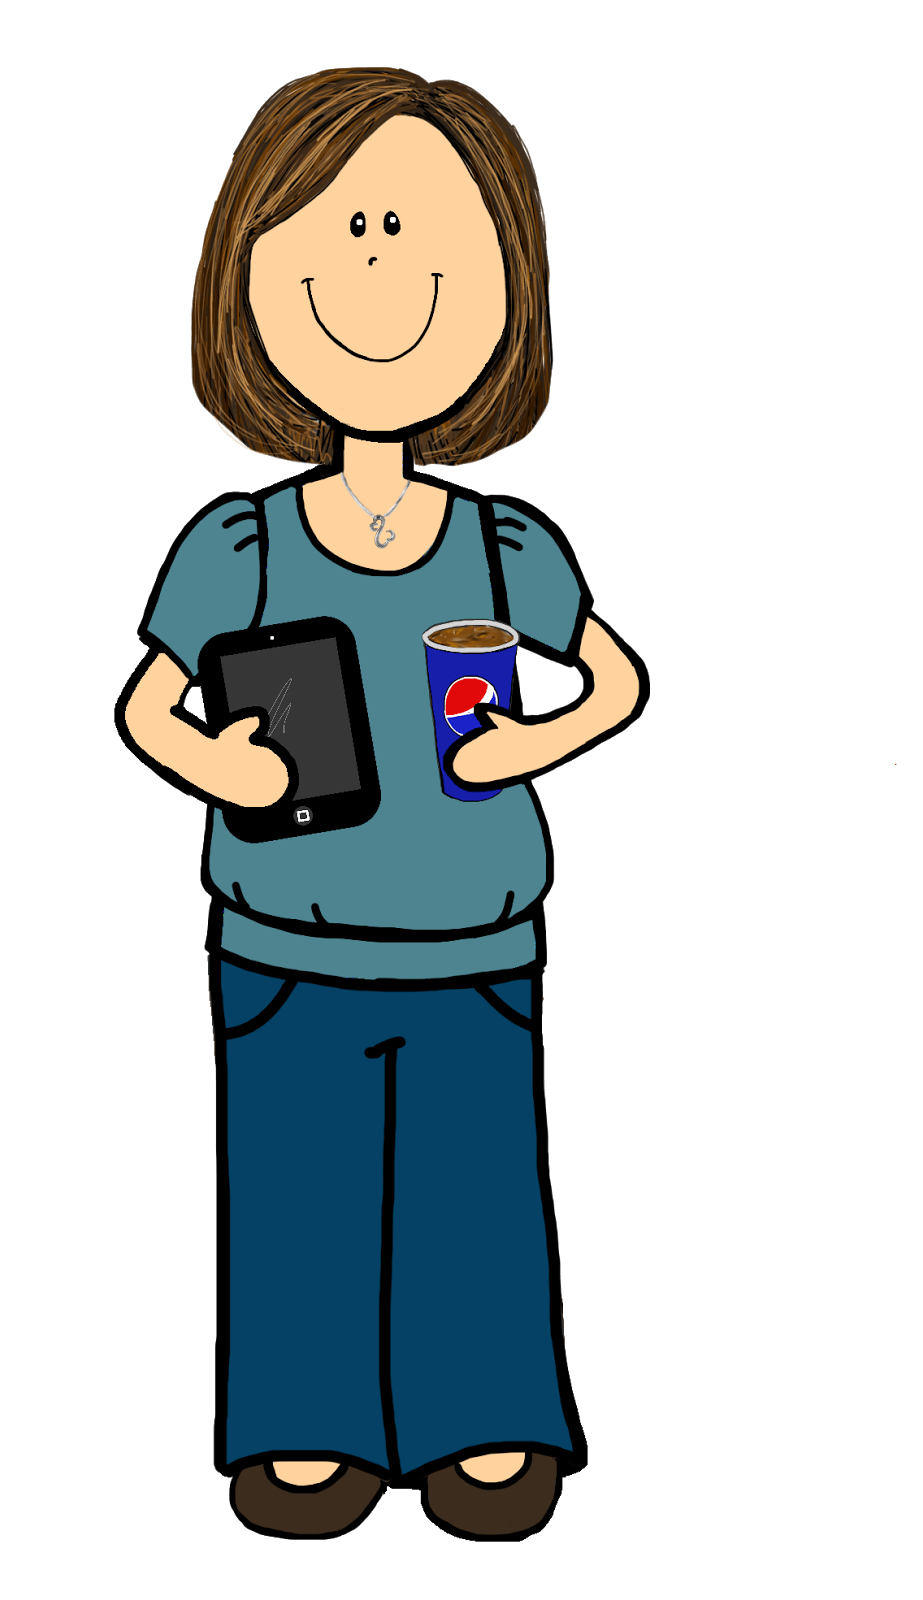 Free Animated People Image, Download Free Clip Art, Free Clip Art